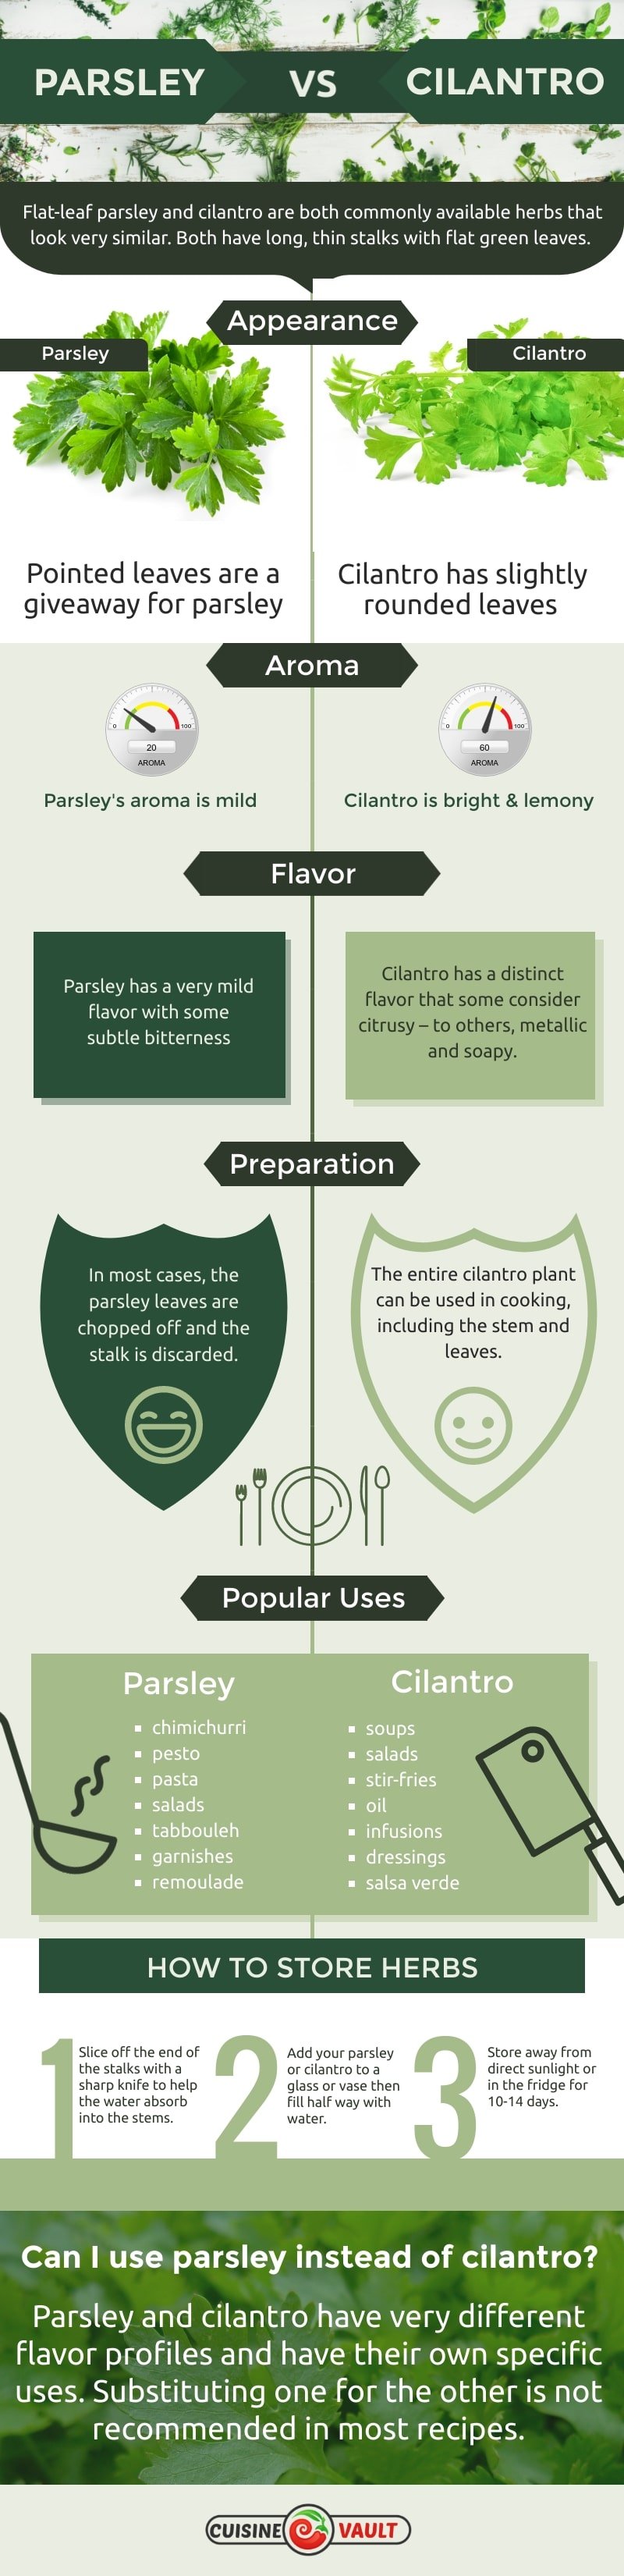 An infographic showing the differences between parsley and cilantro